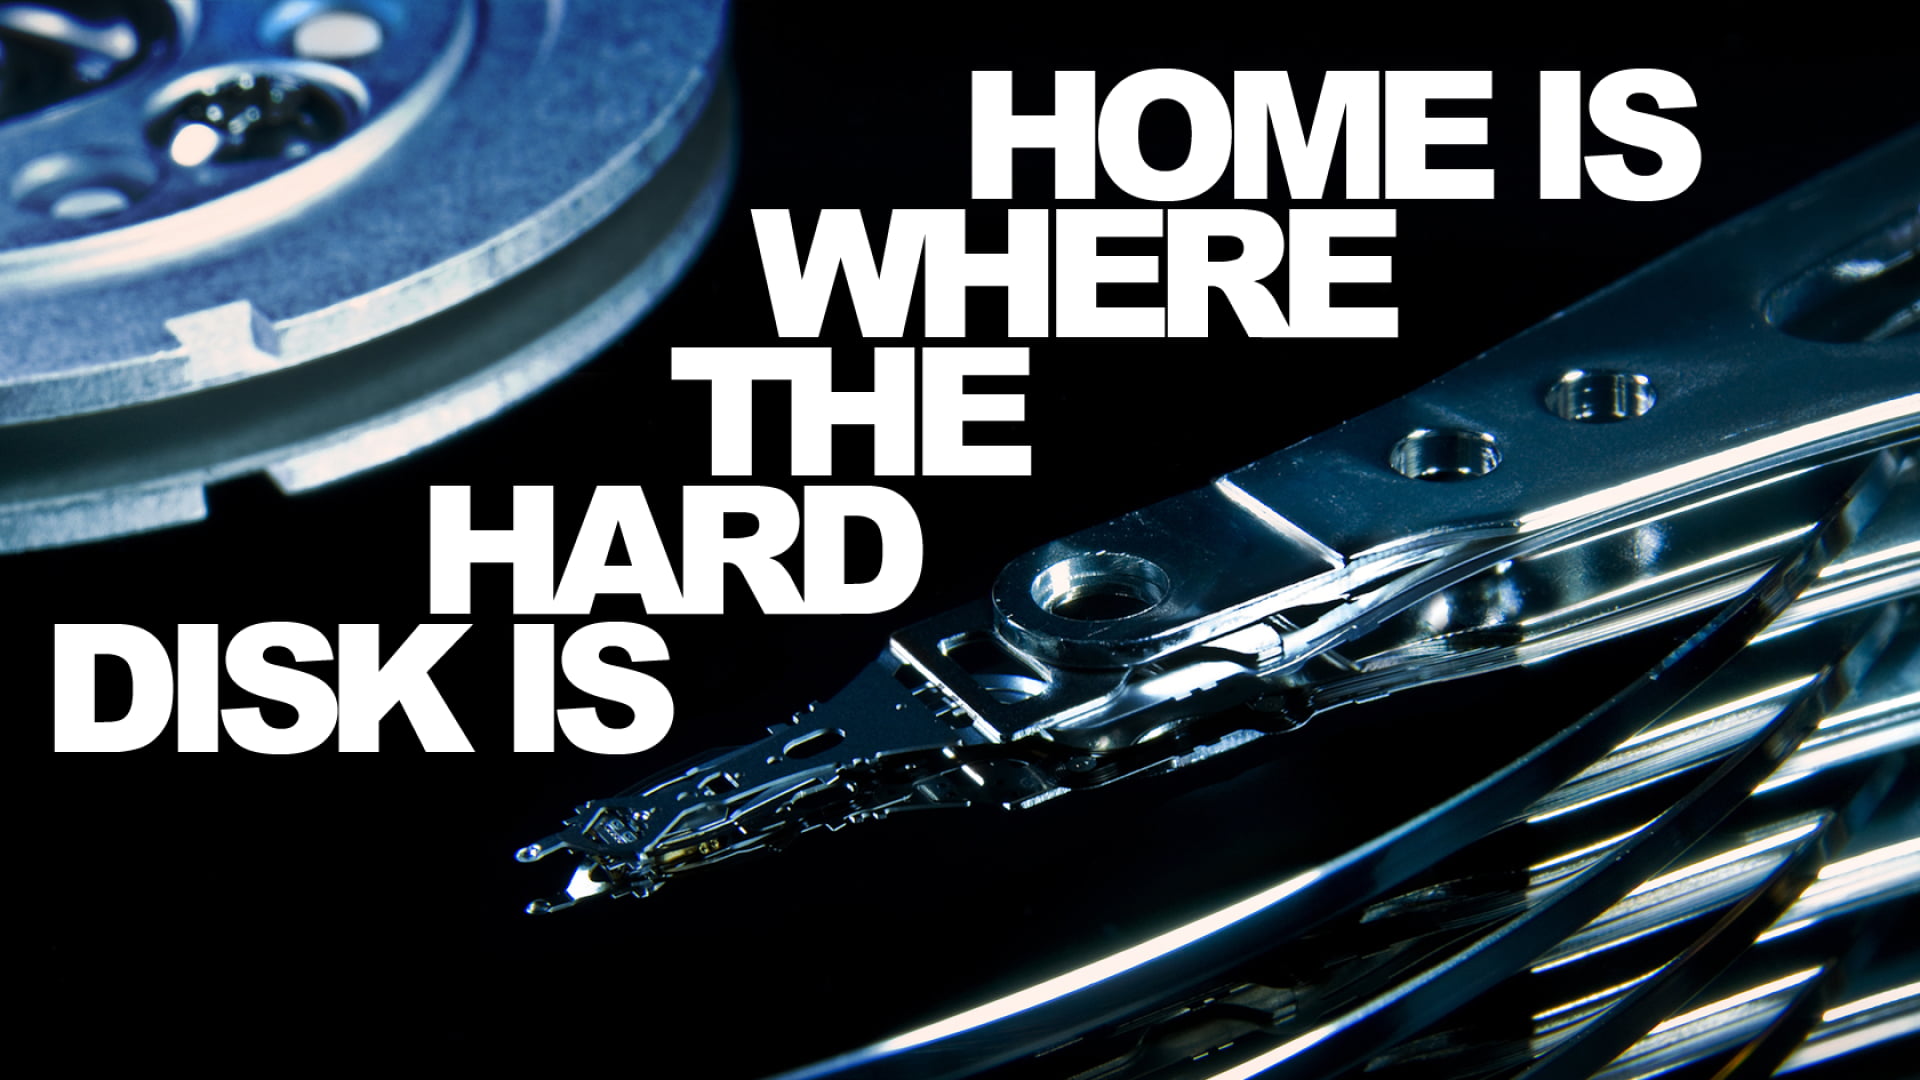 Home is where the hard disk is text